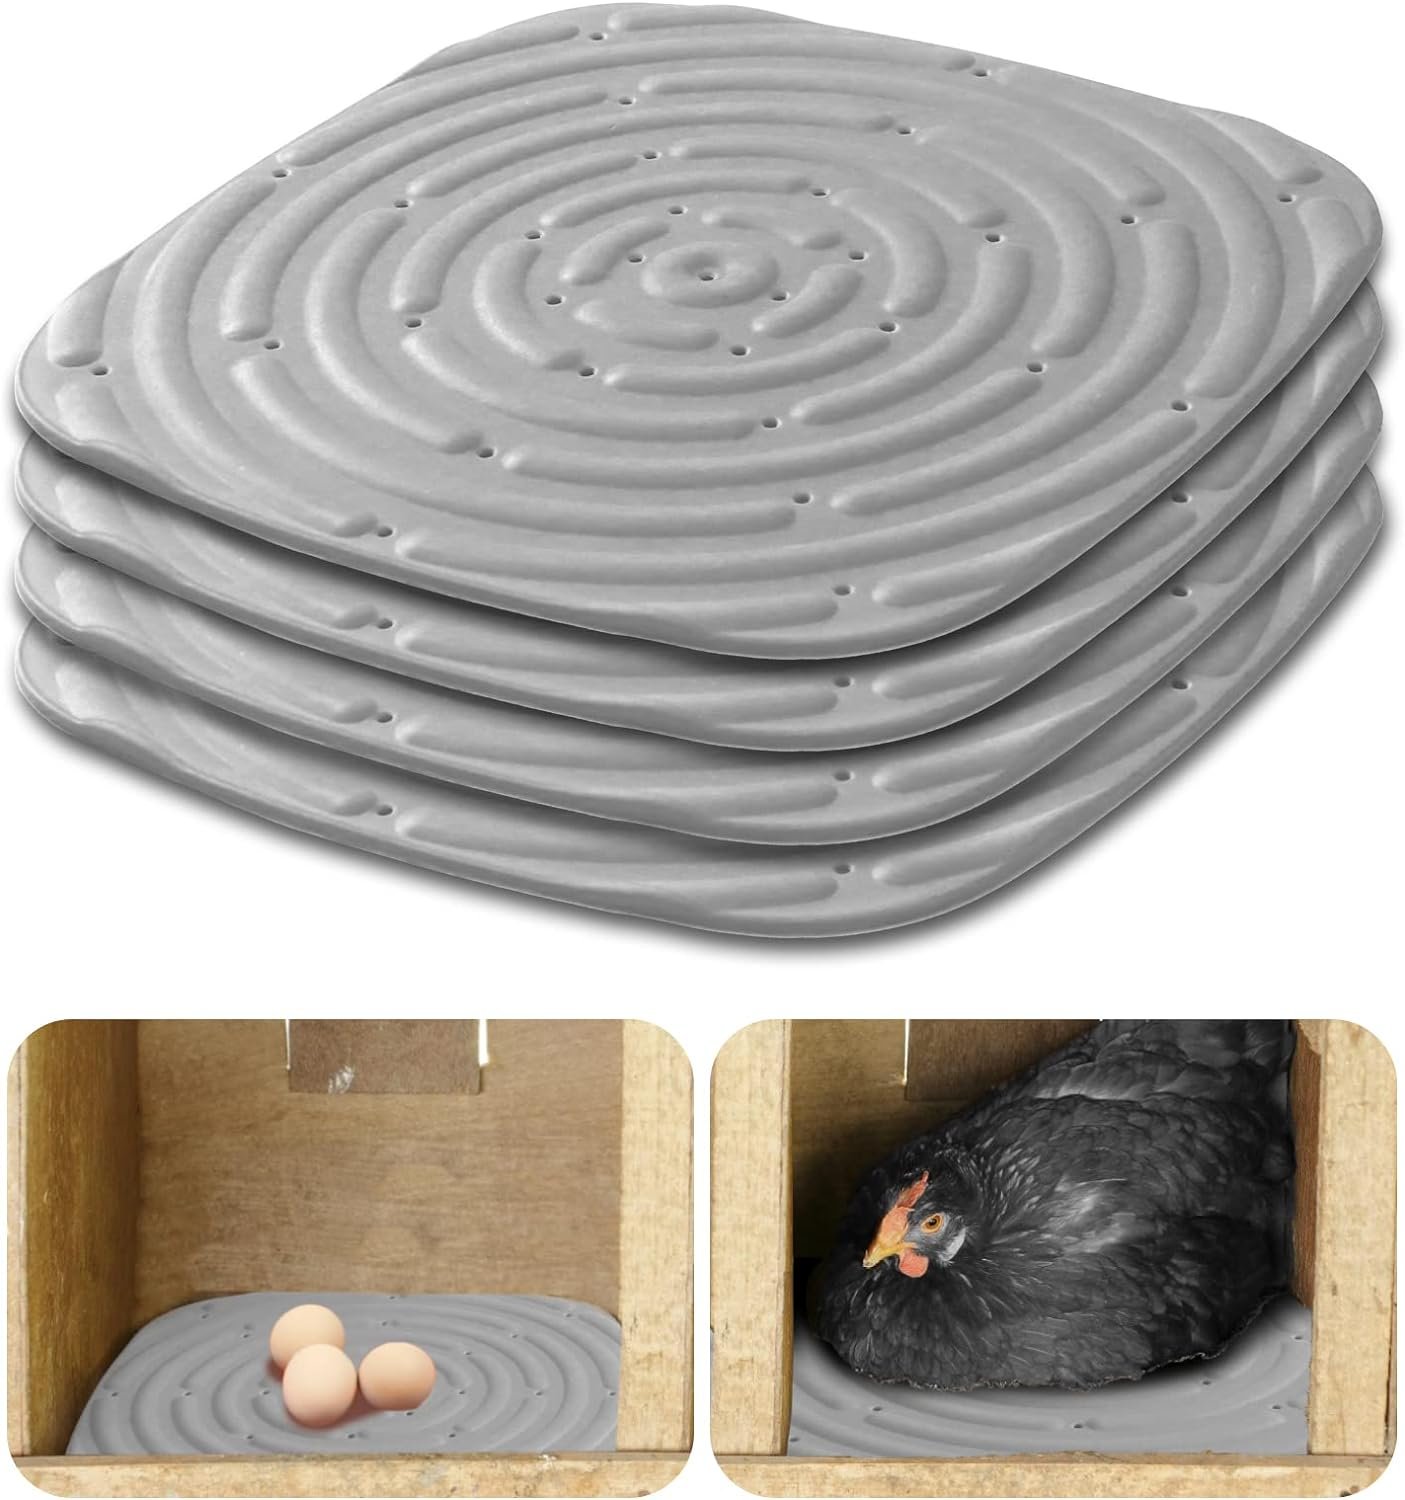 NMM Chicken Nesting Box Pads, 4 Pack Washable Sponge Nesting Box Liners, Reusable Egg Laying Mats for Chicken Coop Poultry Nest Boxes Ducks Poultry, Durable Hen House Accessories (Grey)